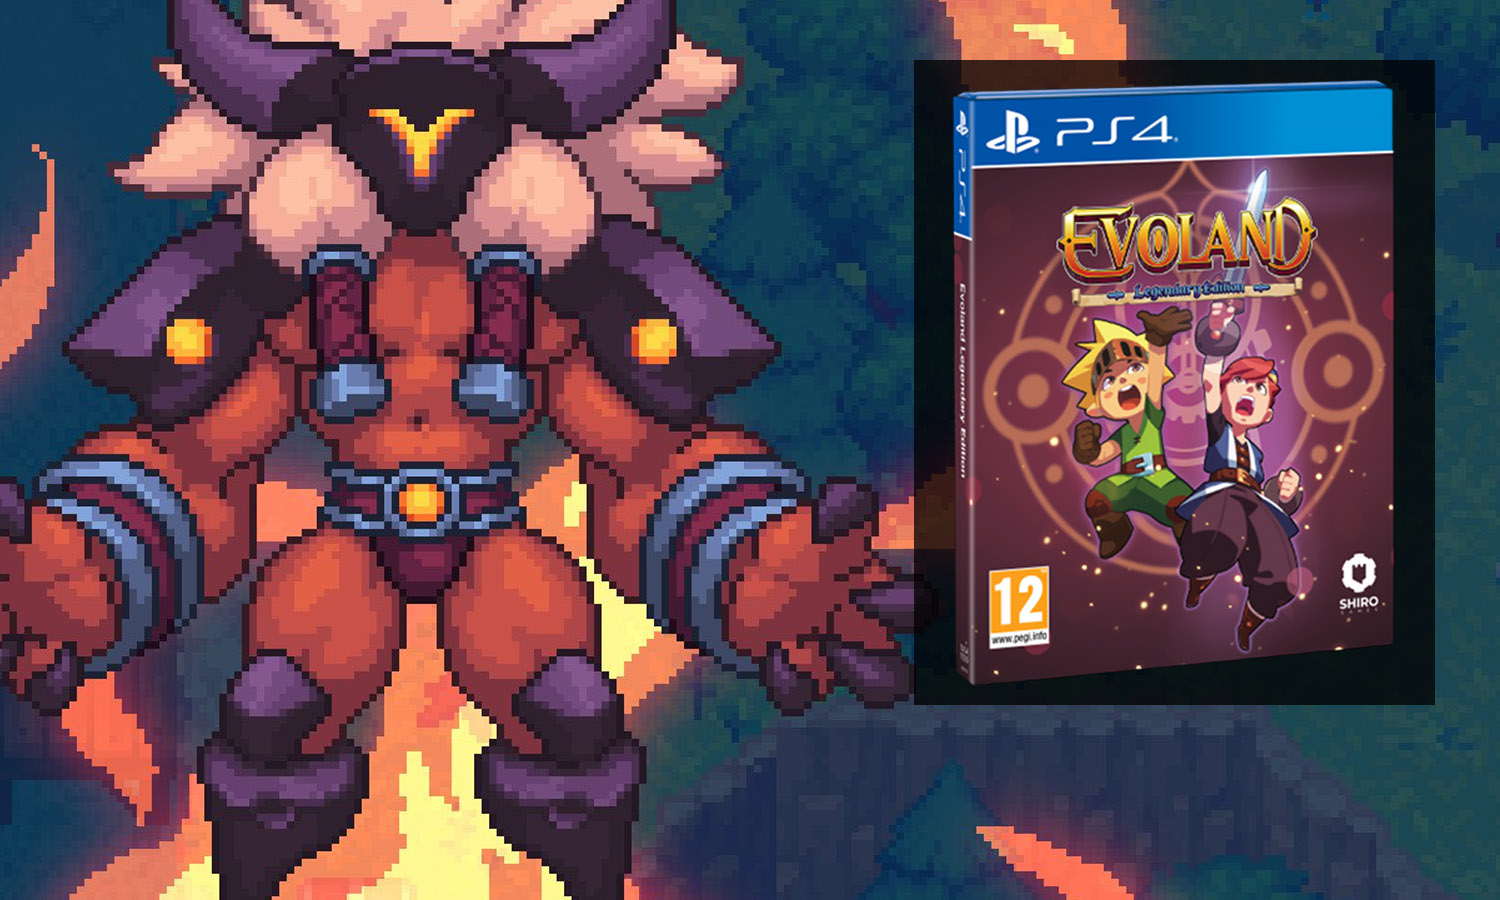 Evoland Legendary Edition for android instal